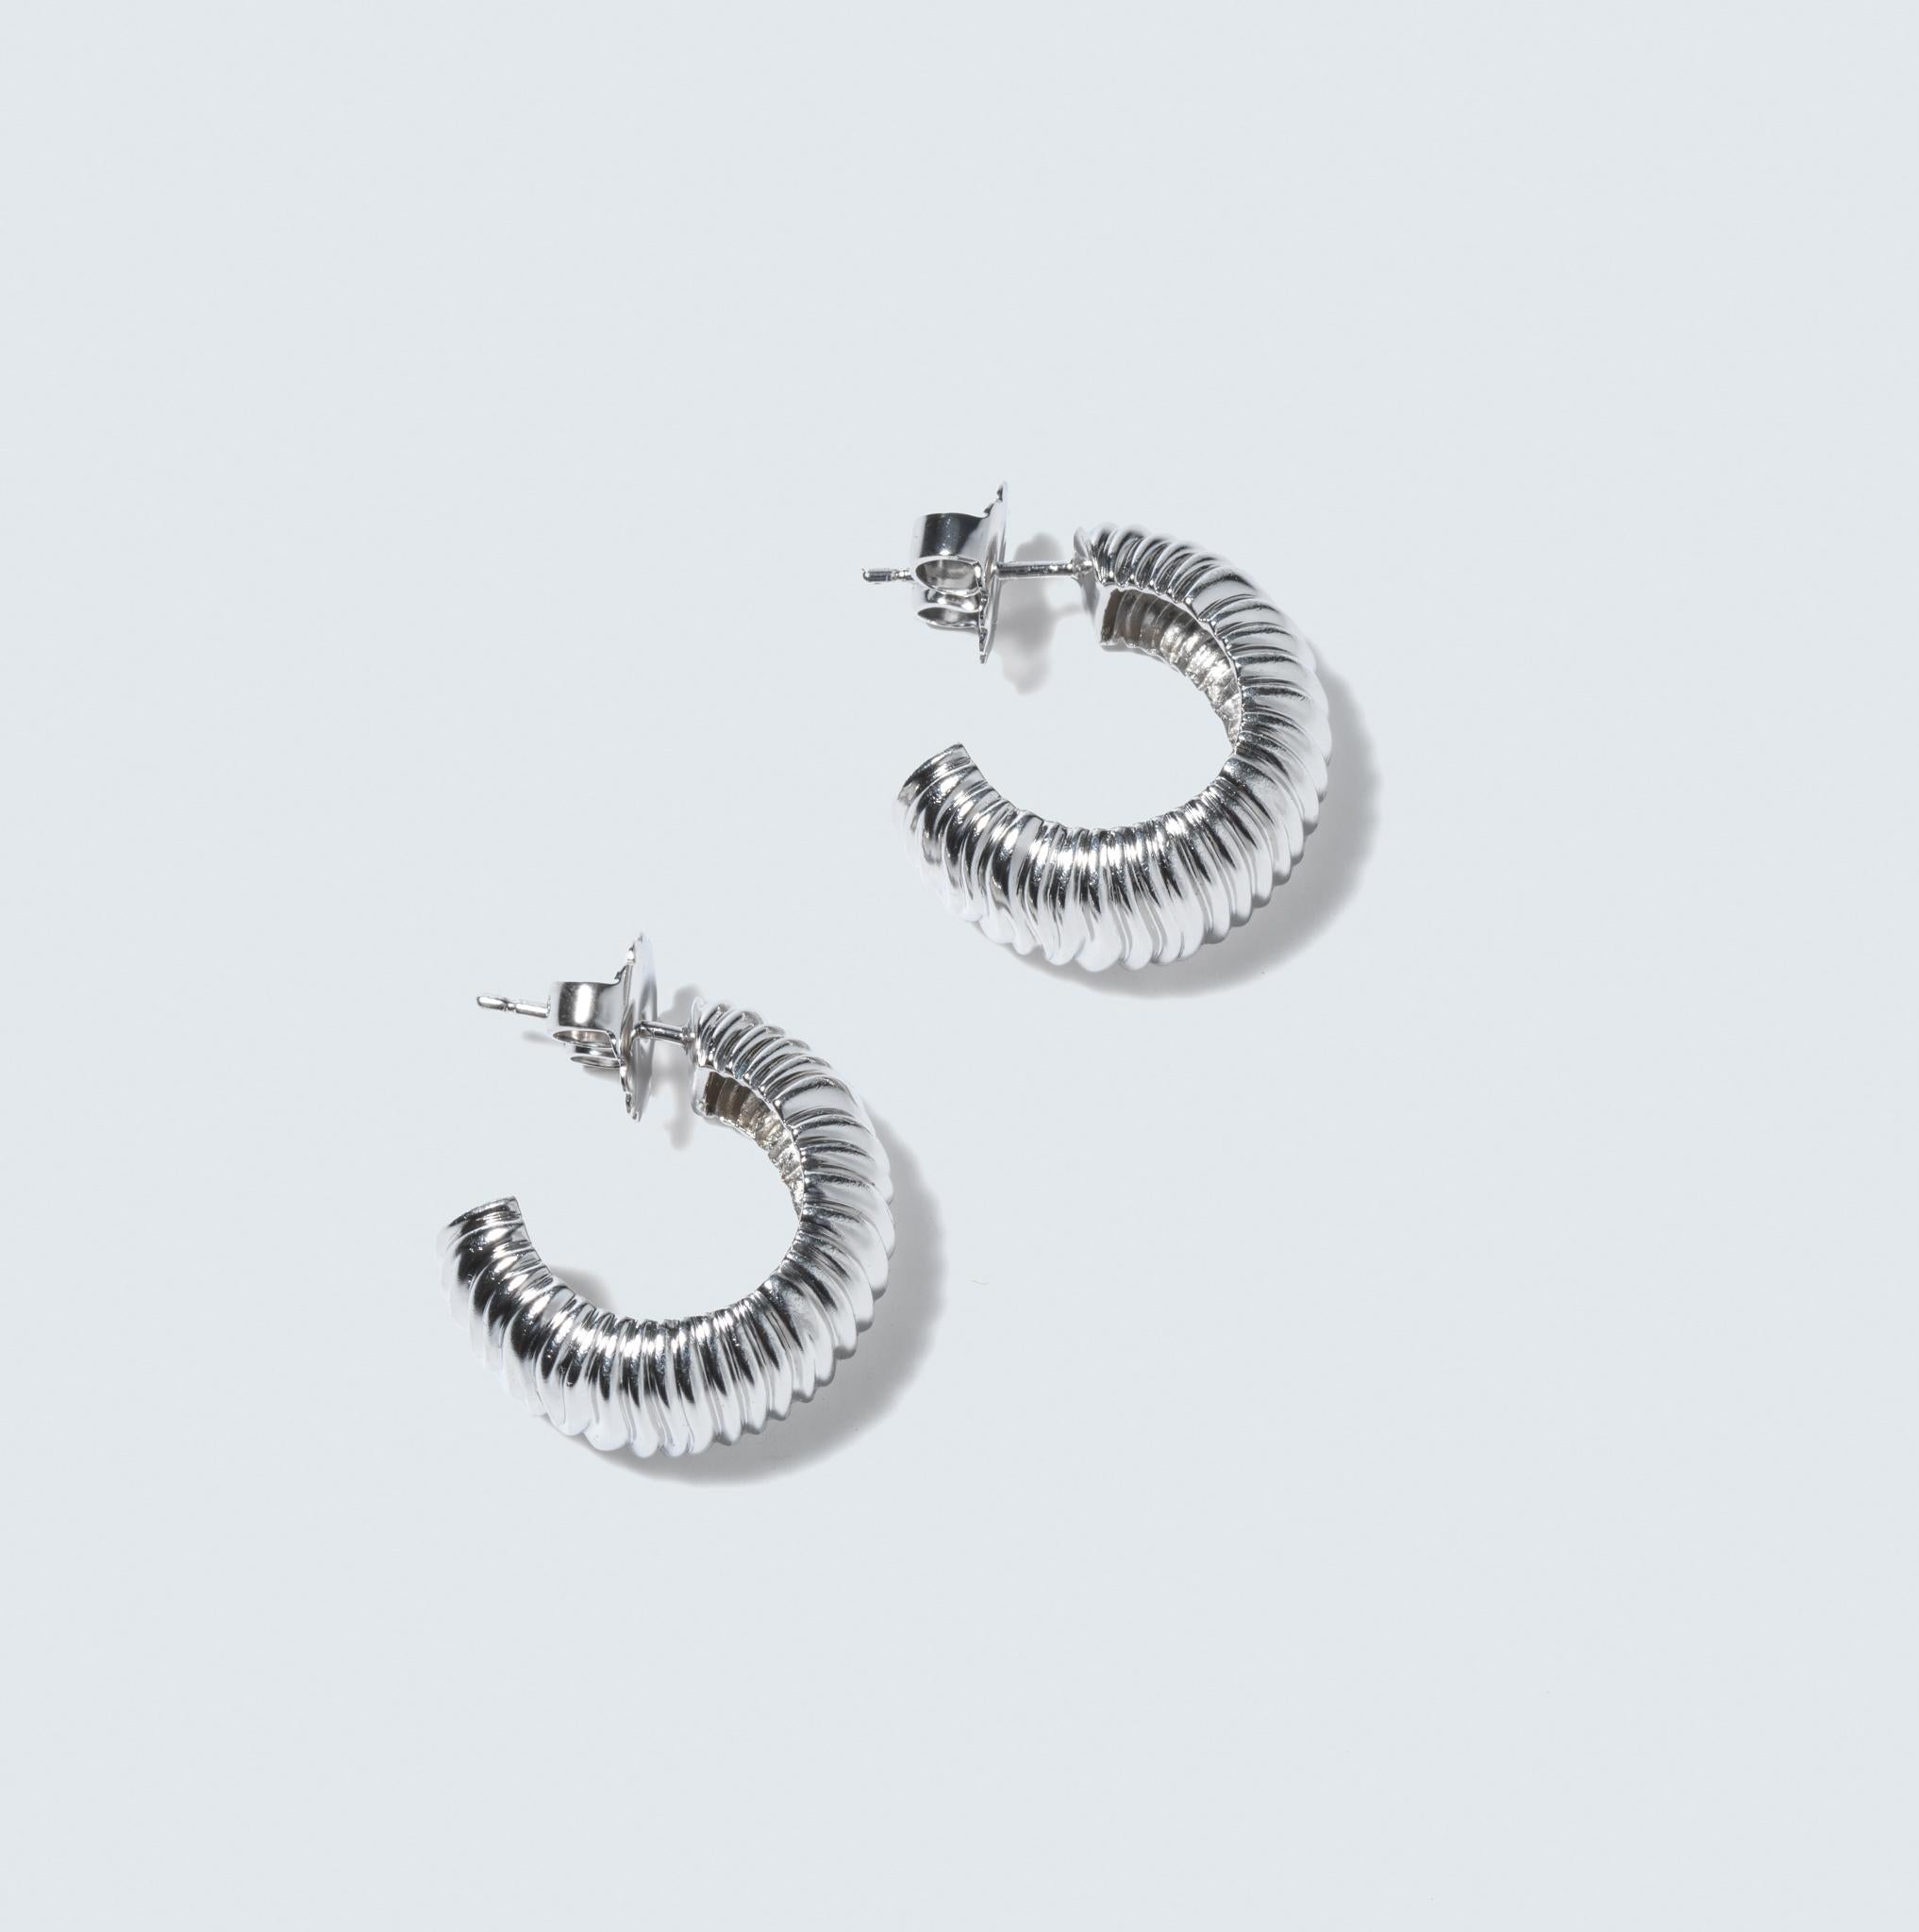 Introducing the mesmerizing sterling silver Hoop Earrings from the 